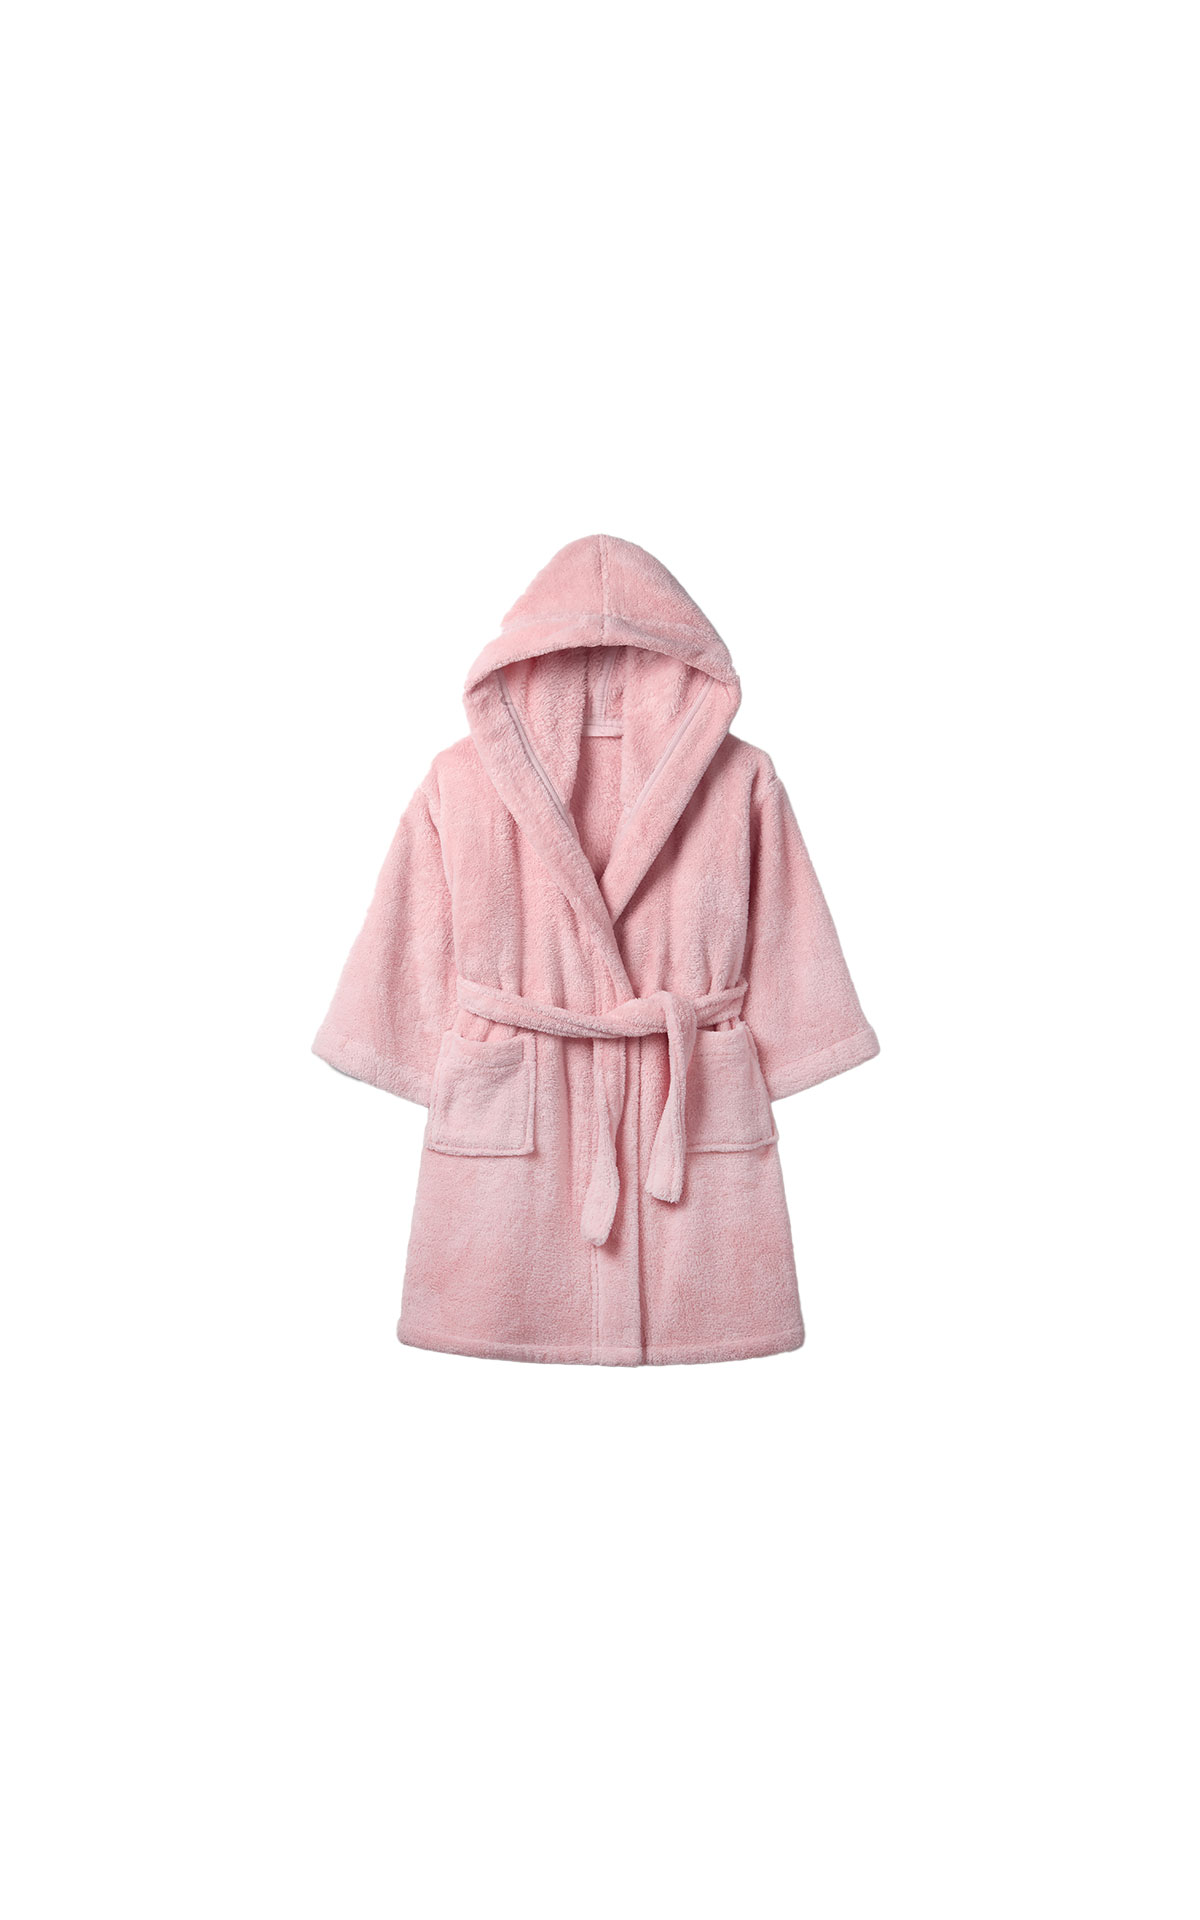 The White Company Pink snuggle robe from Bicester Village